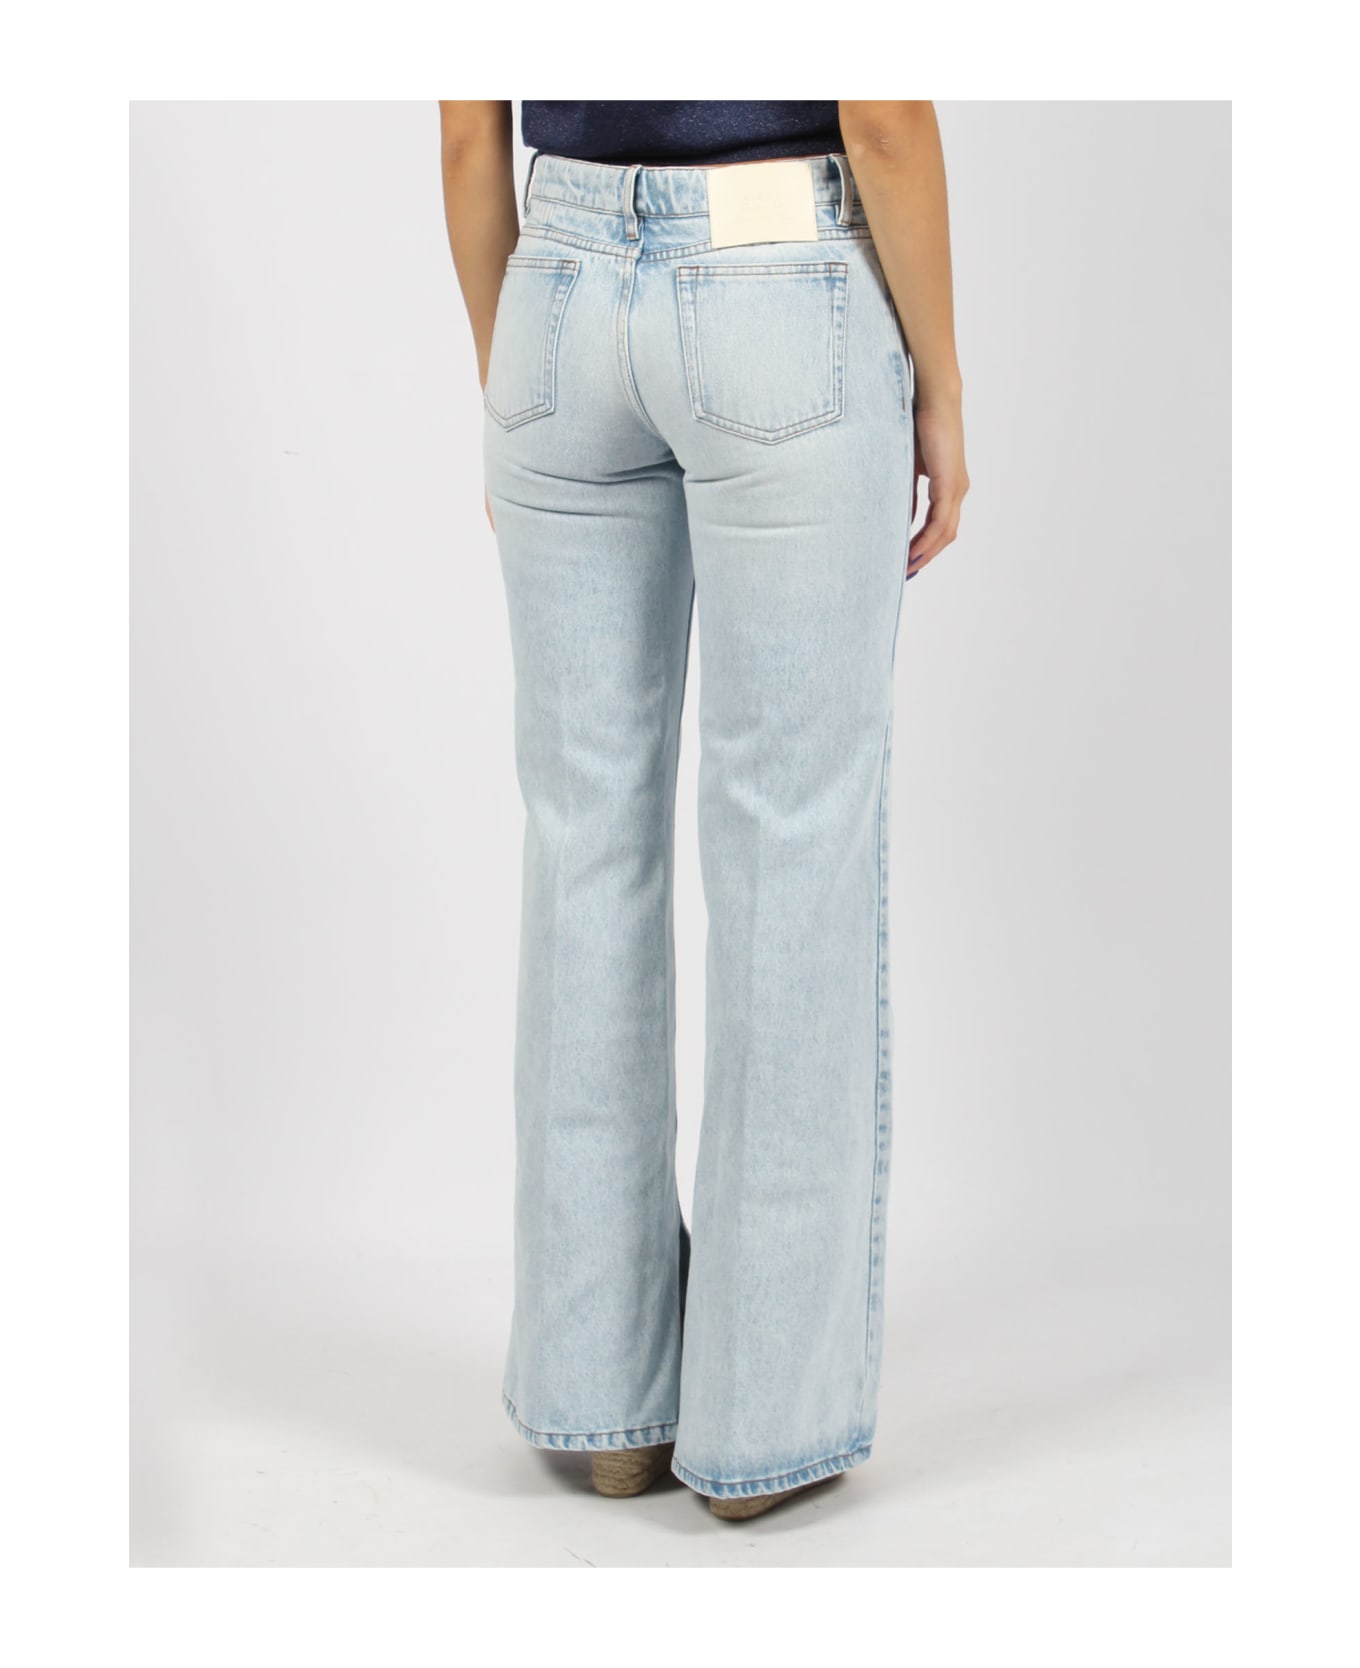 Ami Alexandre Mattiussi Slitted Flare Fit Jeans - Blue